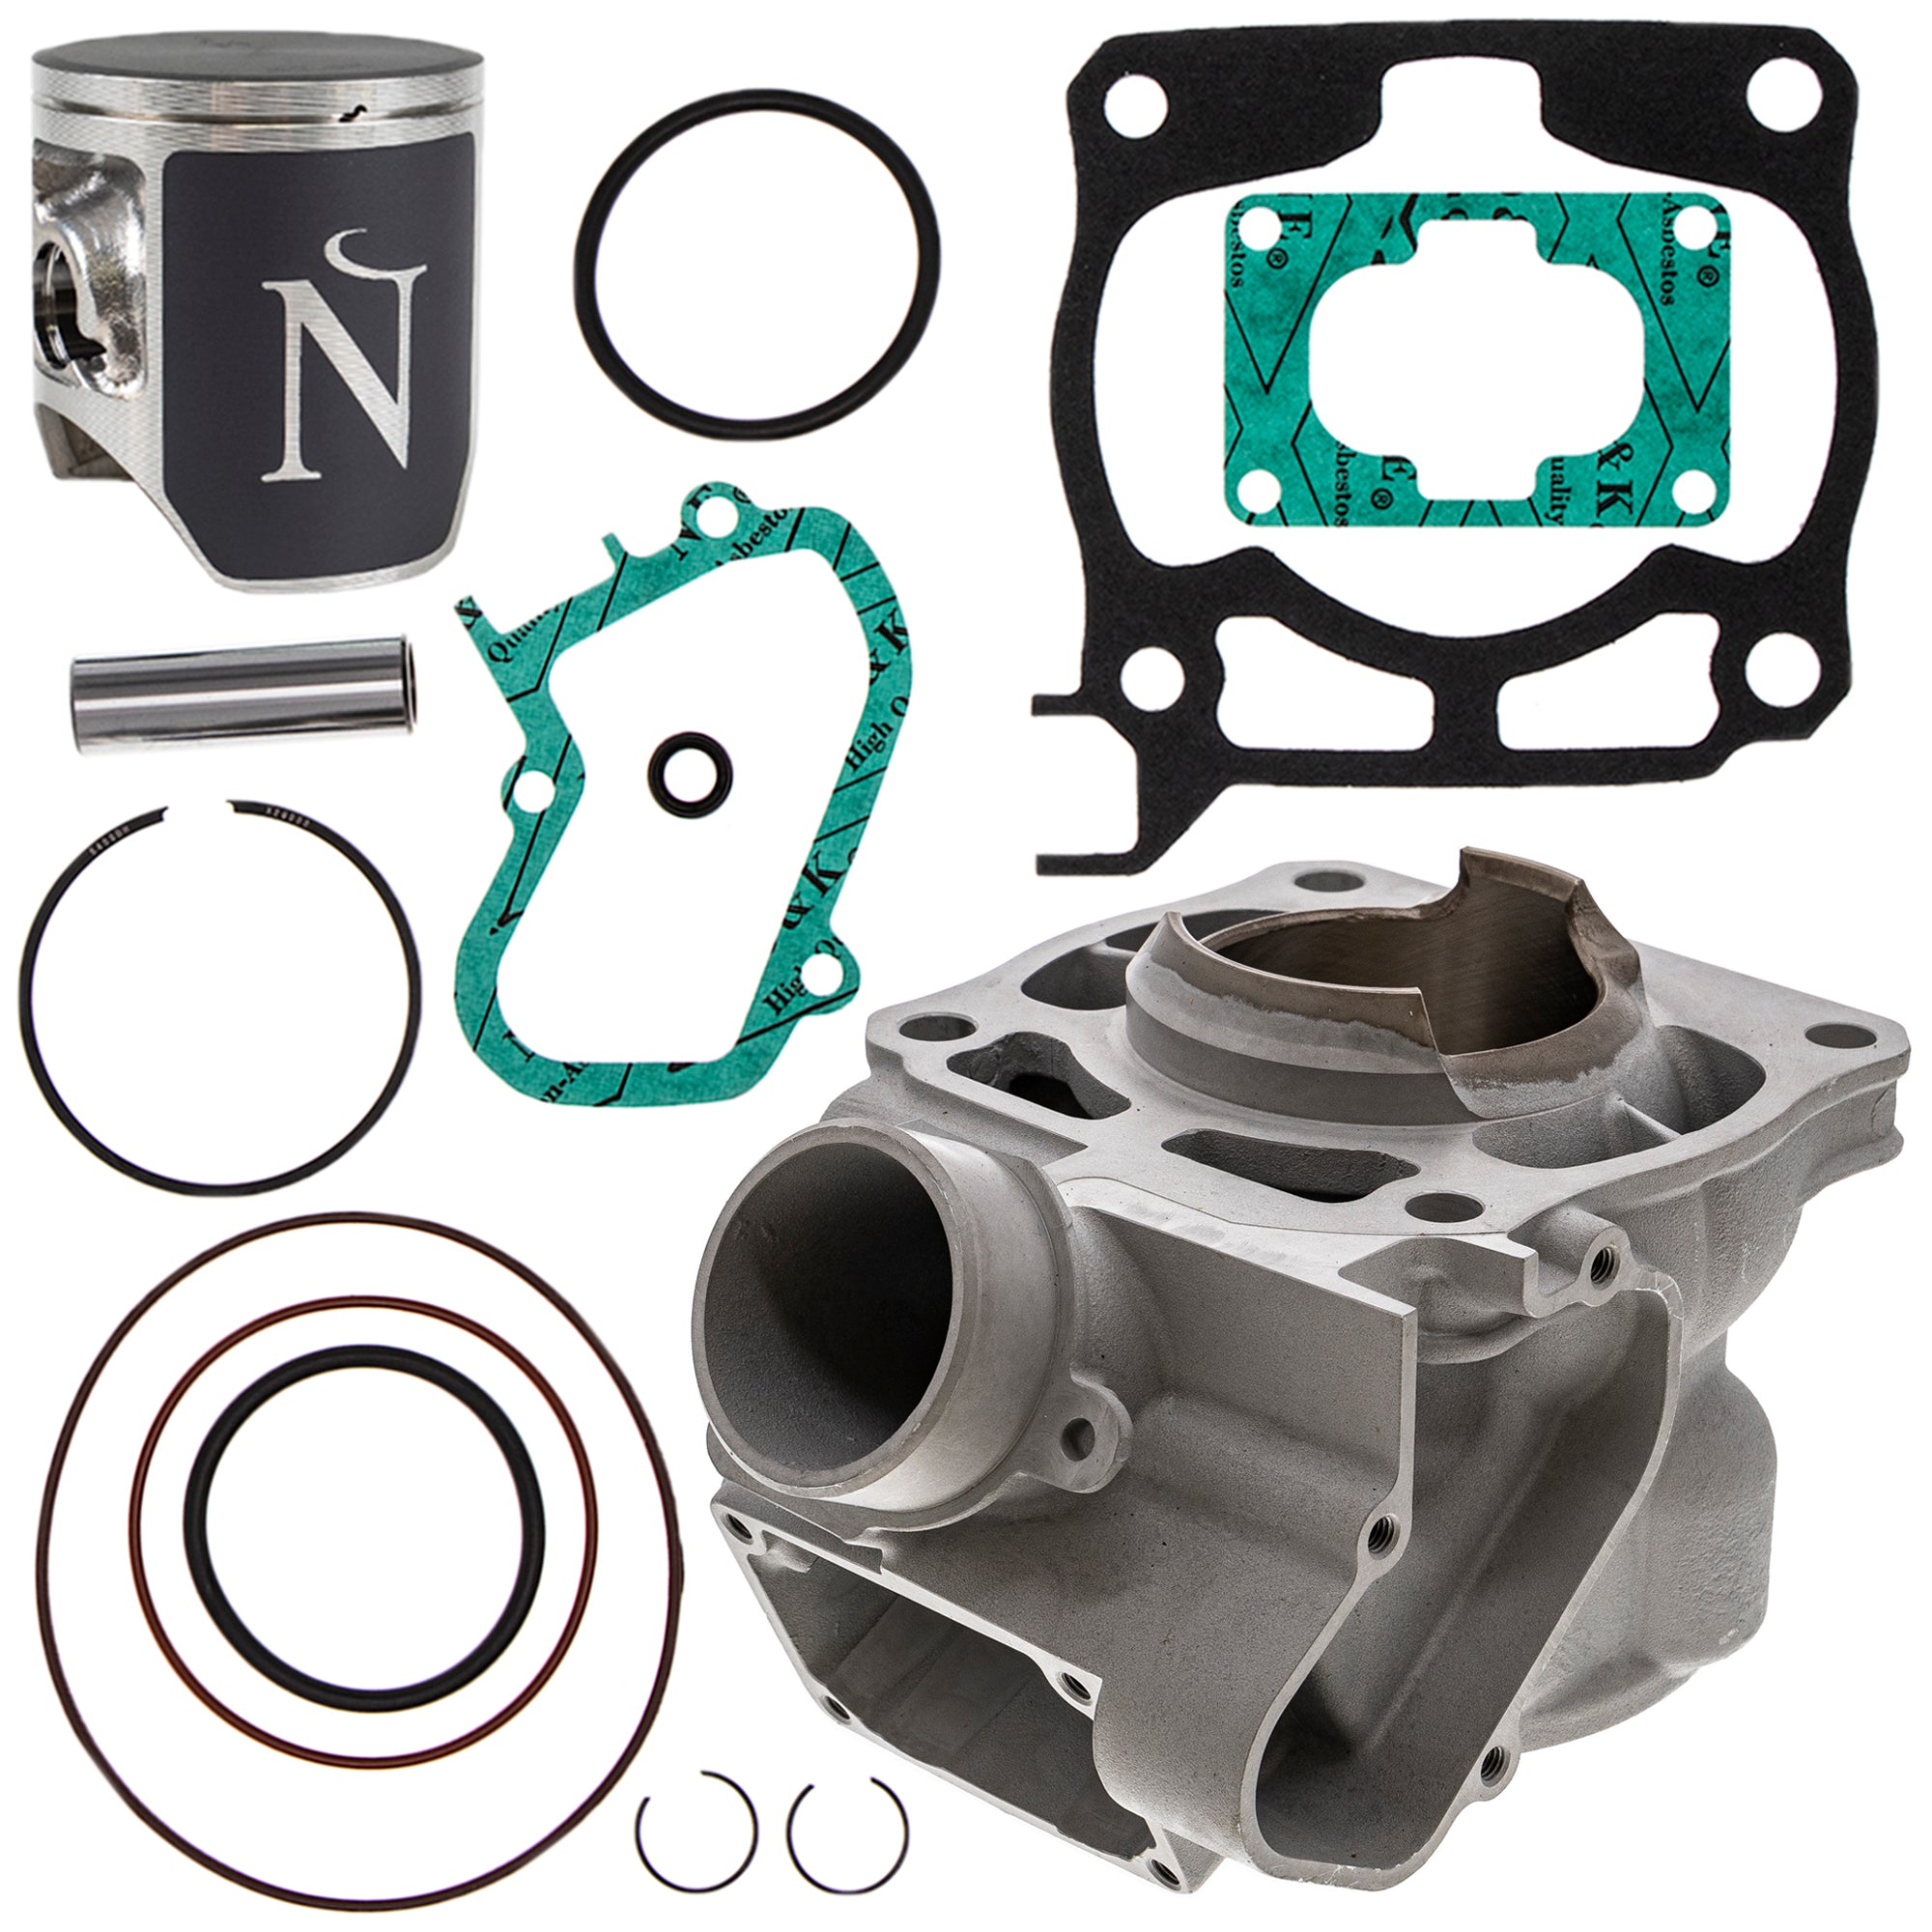 Top End Kit Cylinder Piston Gasket for zOTHER Yamaha YZ125 93450-16812-00 93450-16068-00 NICHE MK1001354